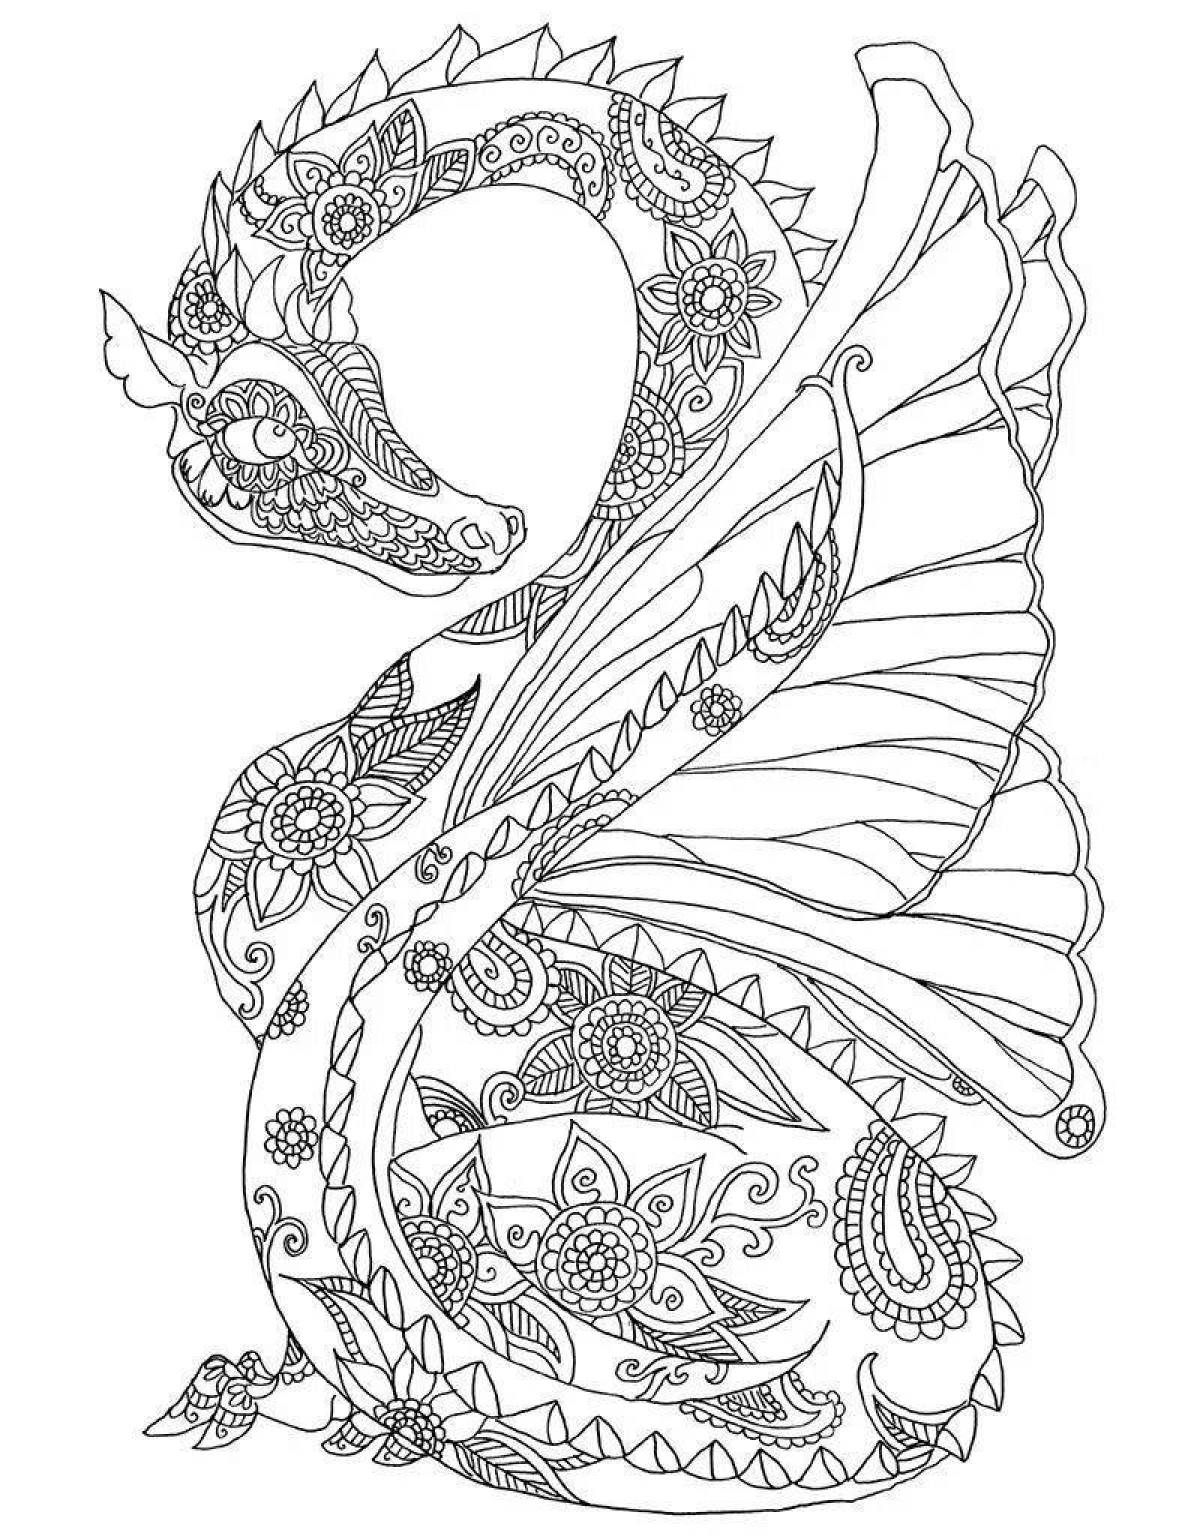 Radiant coloring page anti-stress dragons